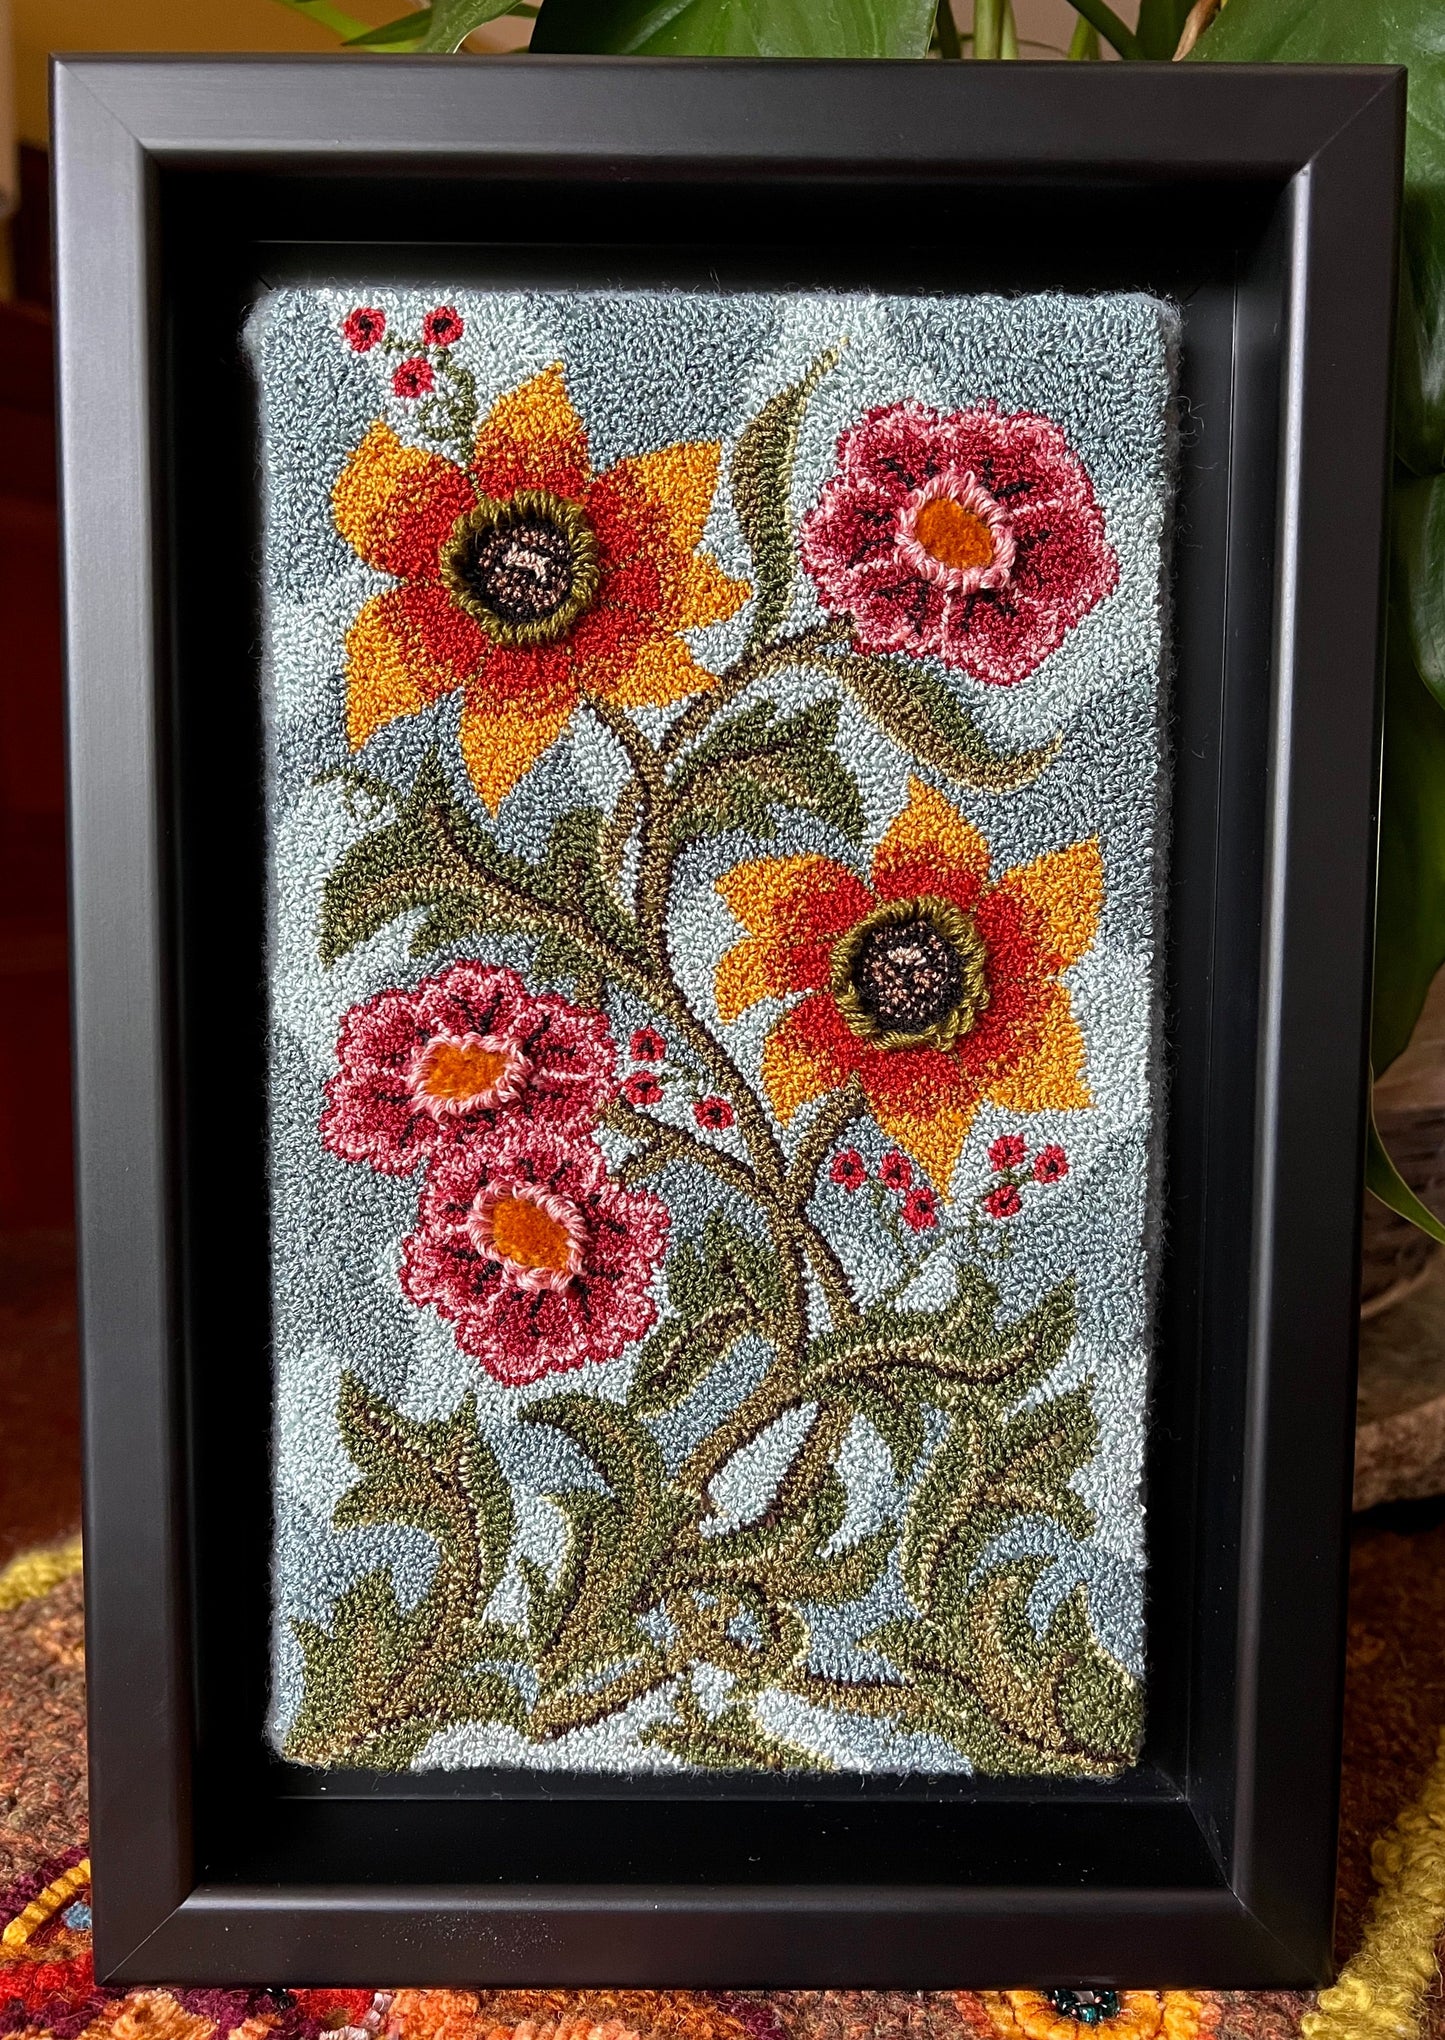 Autumn Sky- Floral Paper or Cloth Pattern Punch Needle Pattern with 25 piece DMC thread kit by Orphaned Wool.